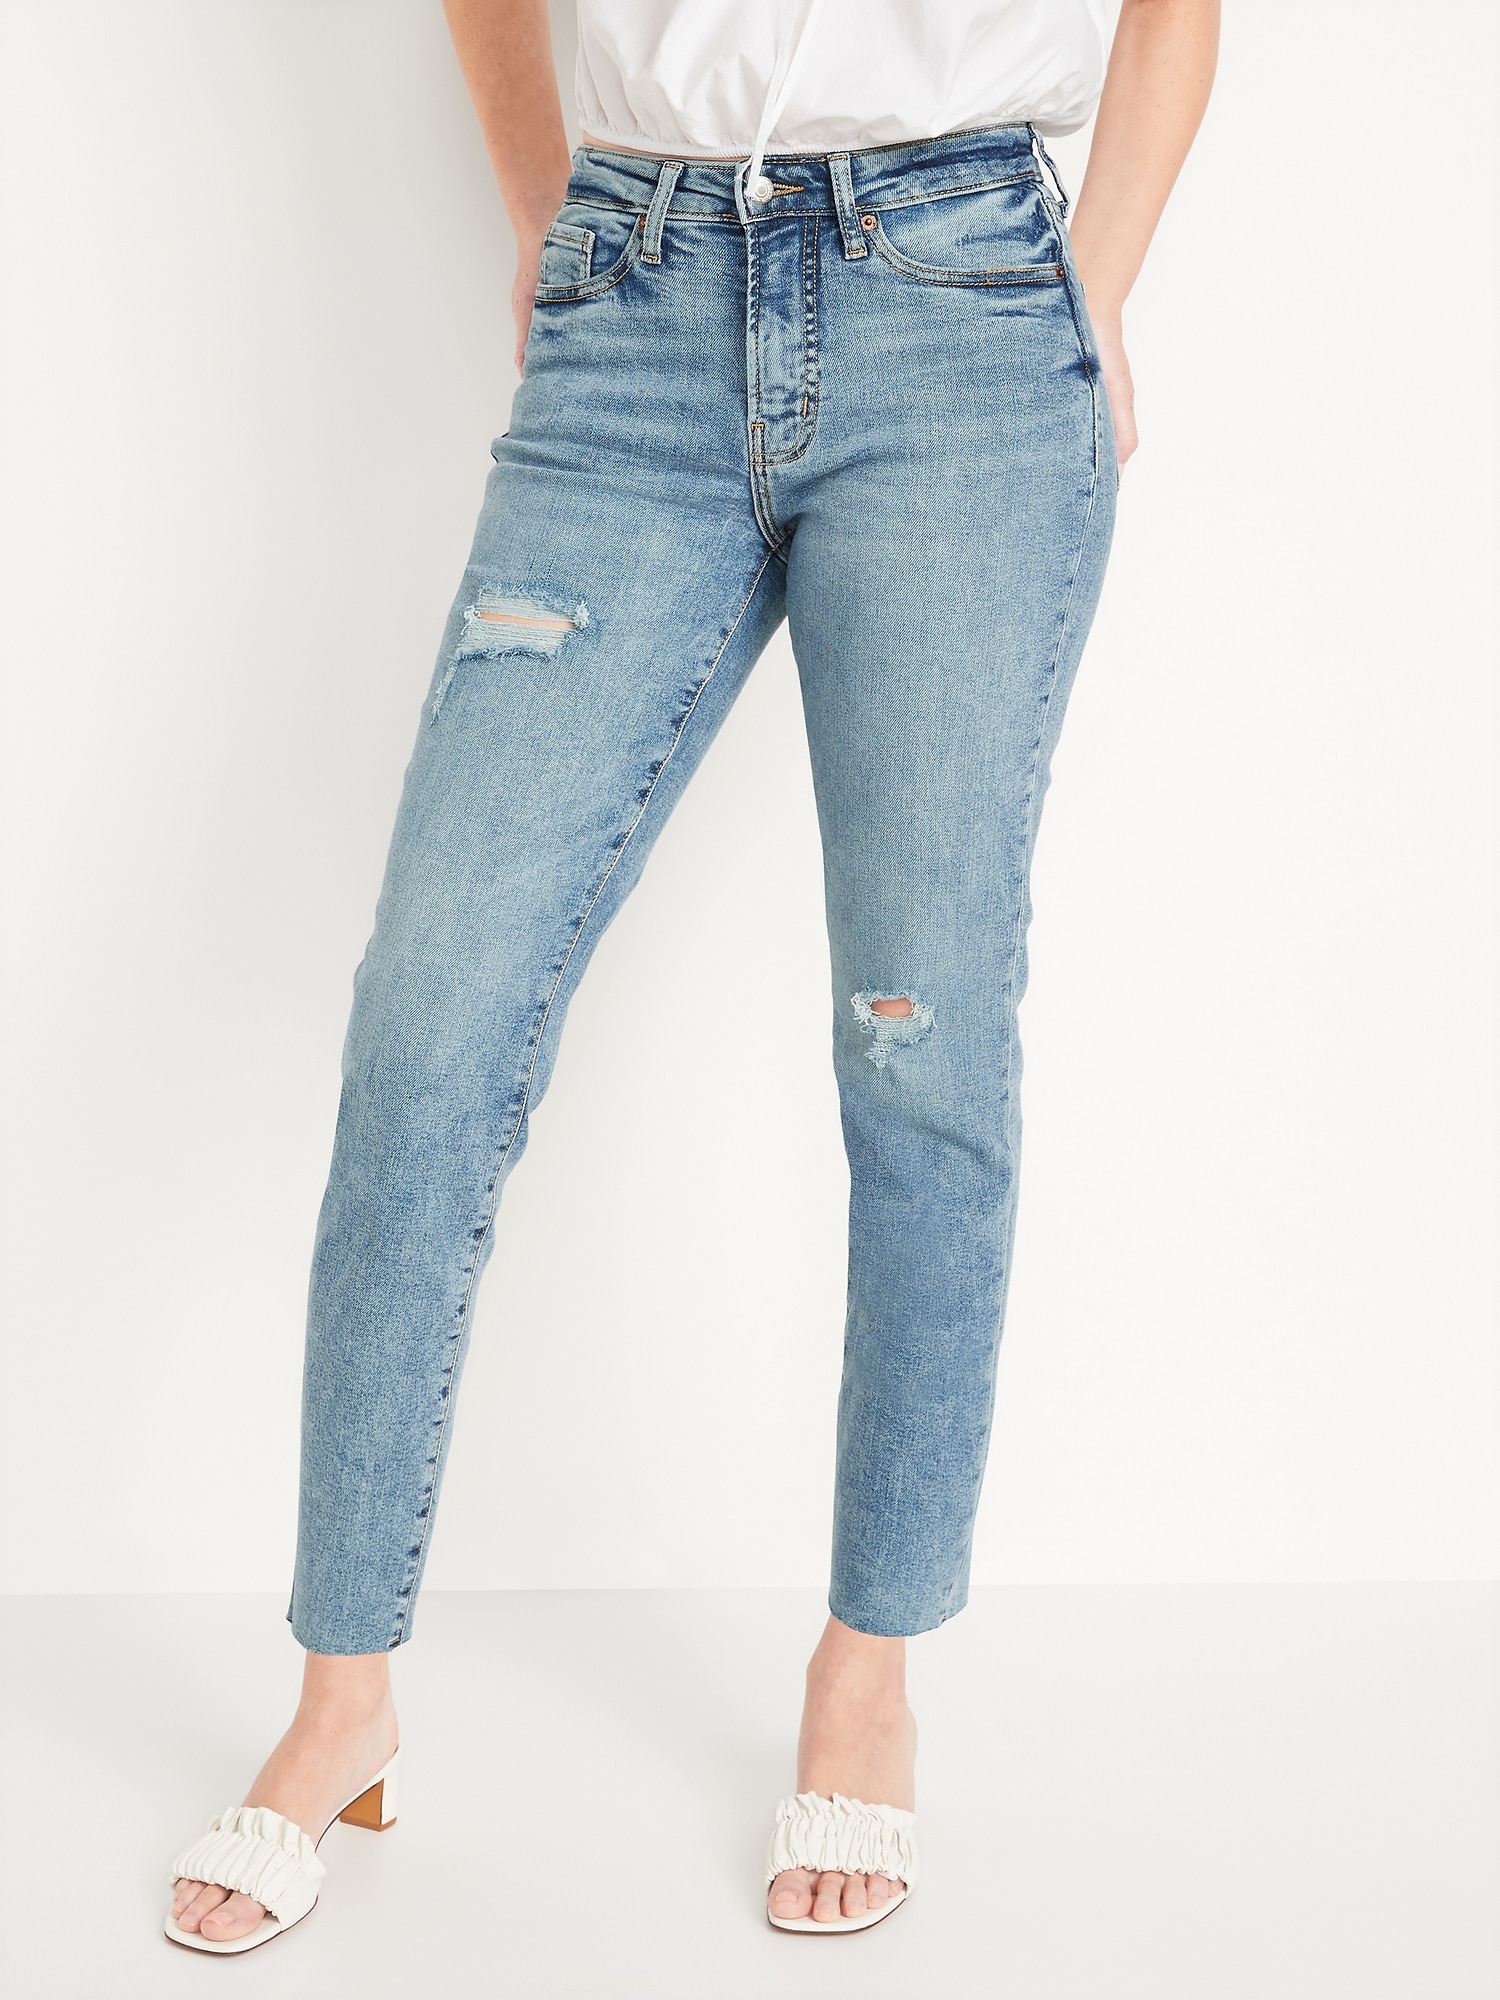 The '90s Straight Jean in Mercer Wash